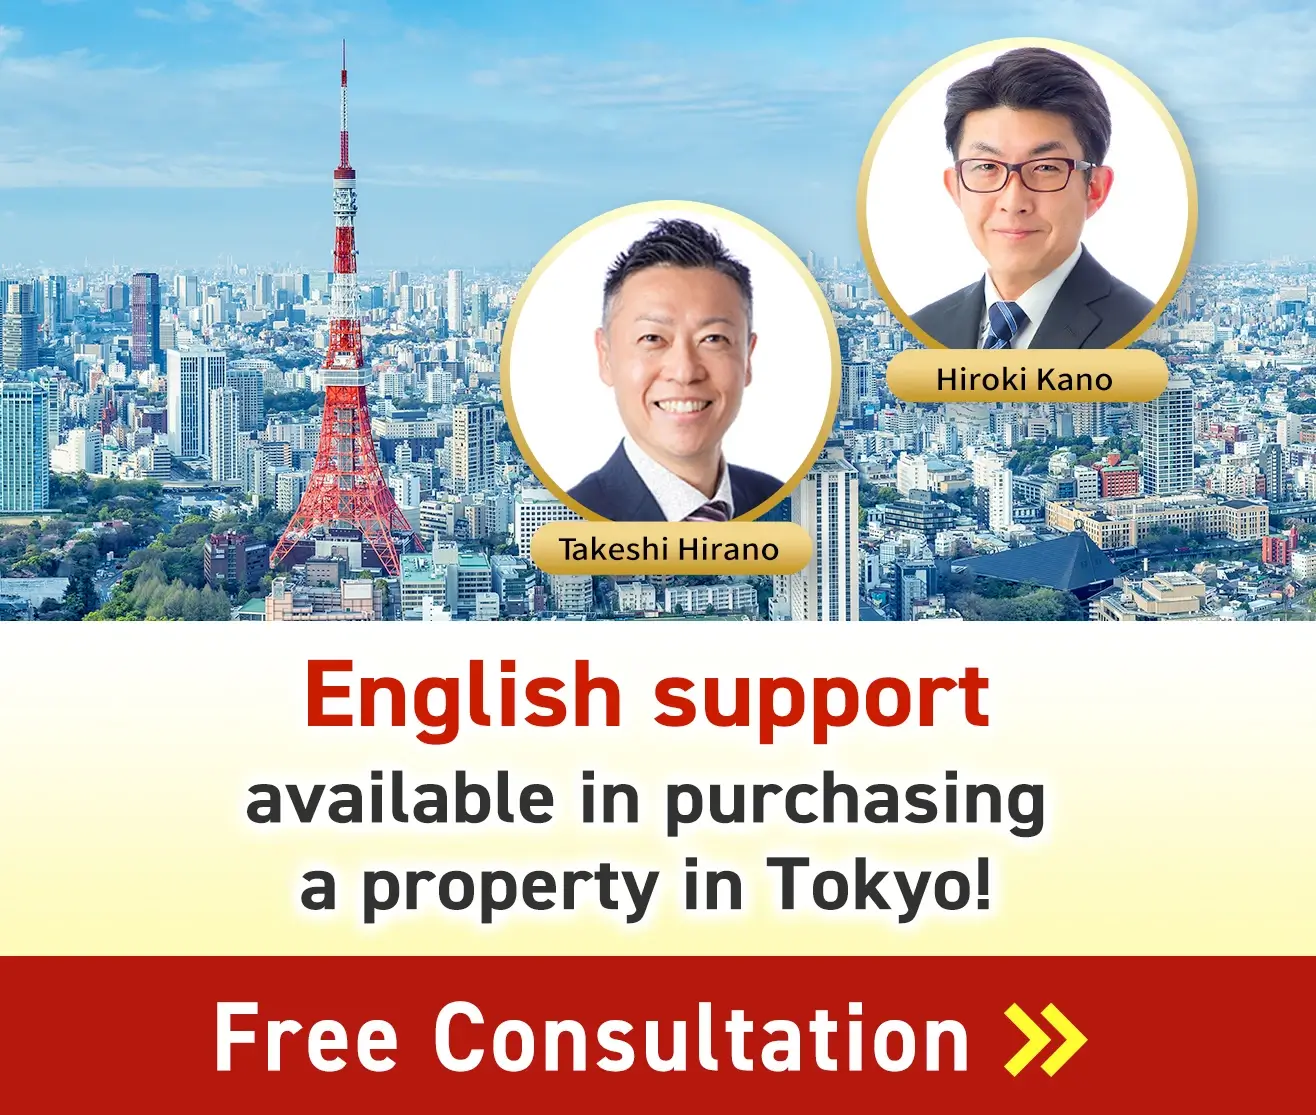 English support available in purchasing a property in Tokyo!